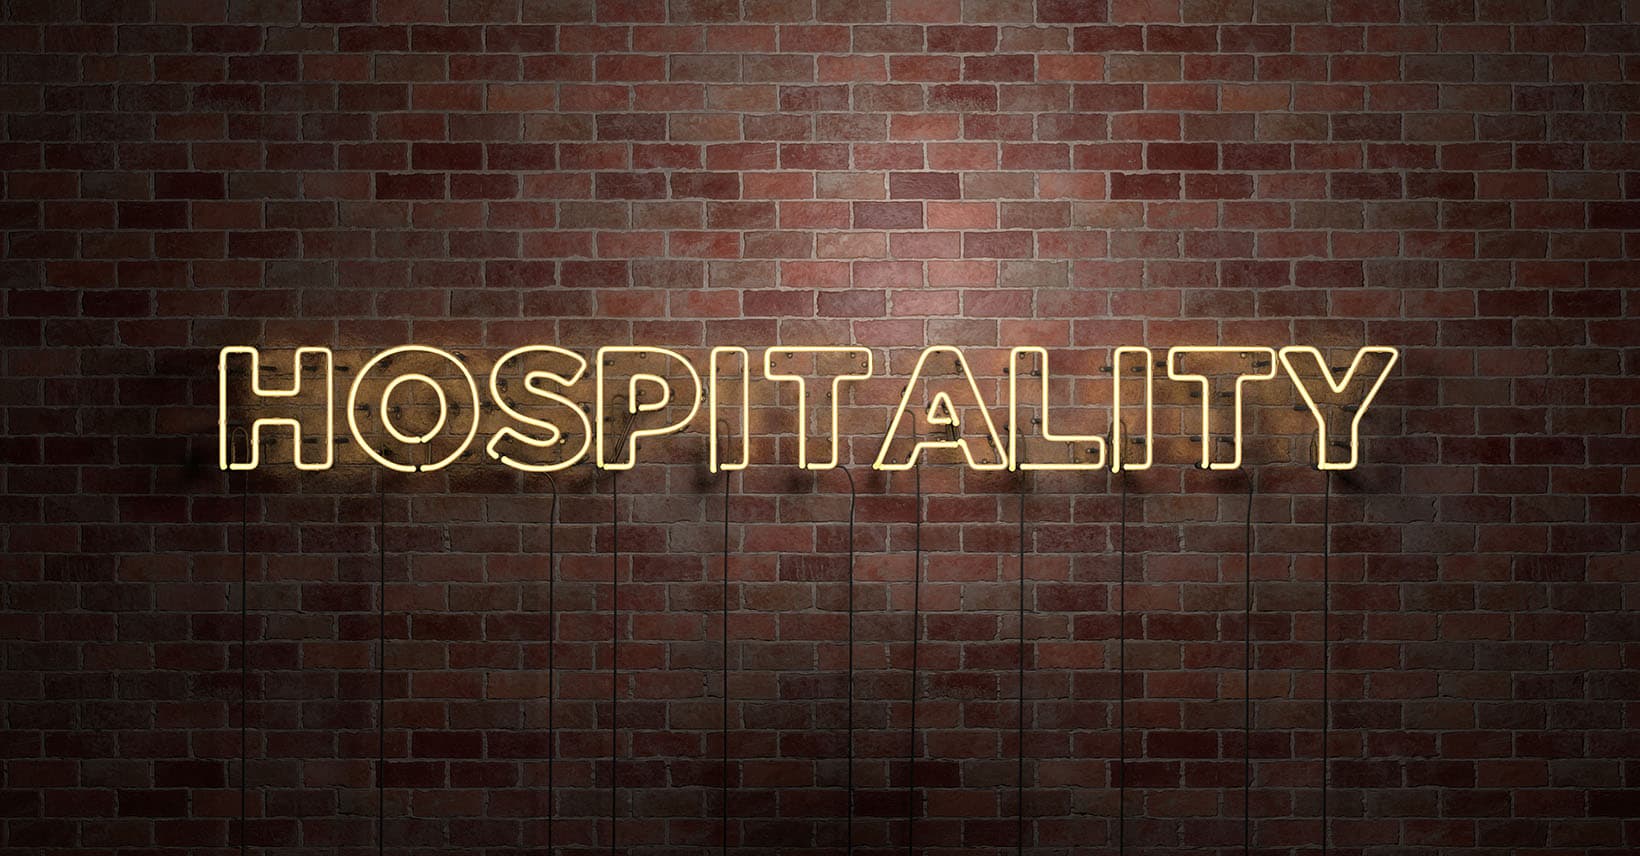 10 common myths about the Hospitality Industry